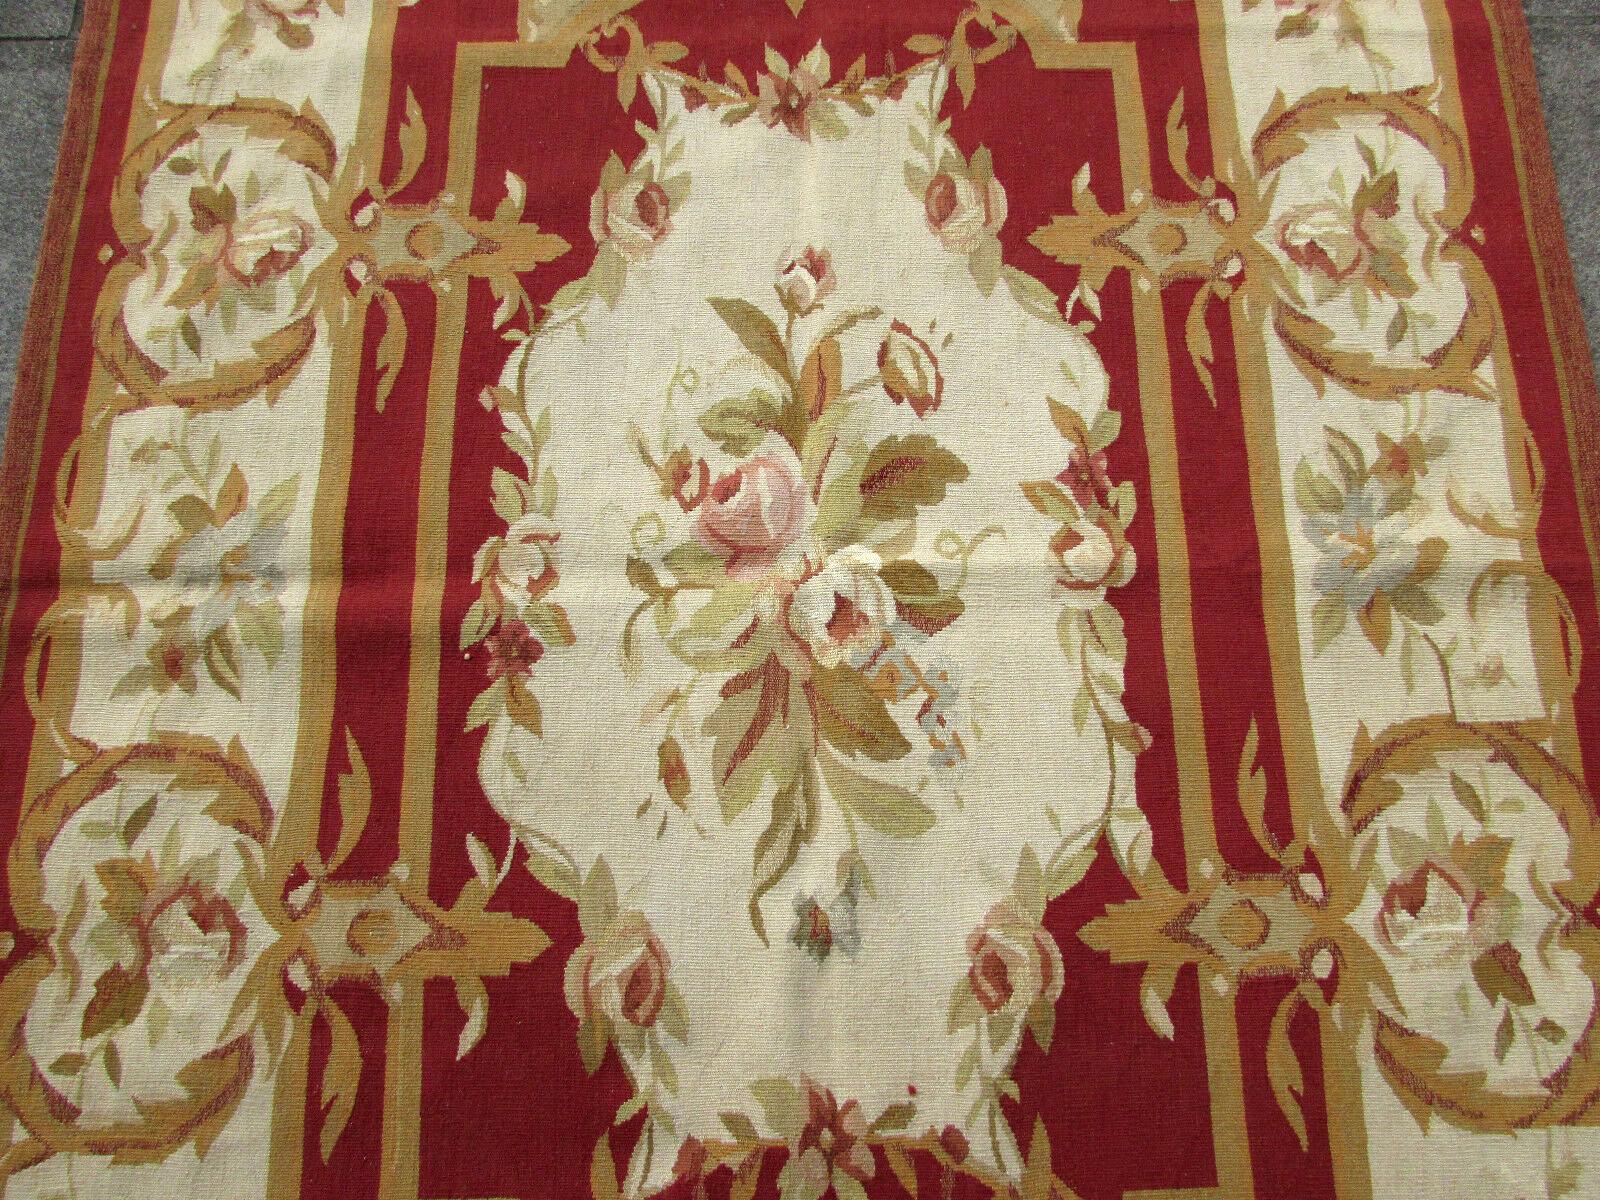 Handmade vintage French Aubusson rug in wool. This rug has been made in the end of 20th century, it is in original good condition.

-Condition: Original good,

-circa 1970s,

-Size: 4' x 6.1' (122cm x 186cm),

-Material: Wool,

-Country of